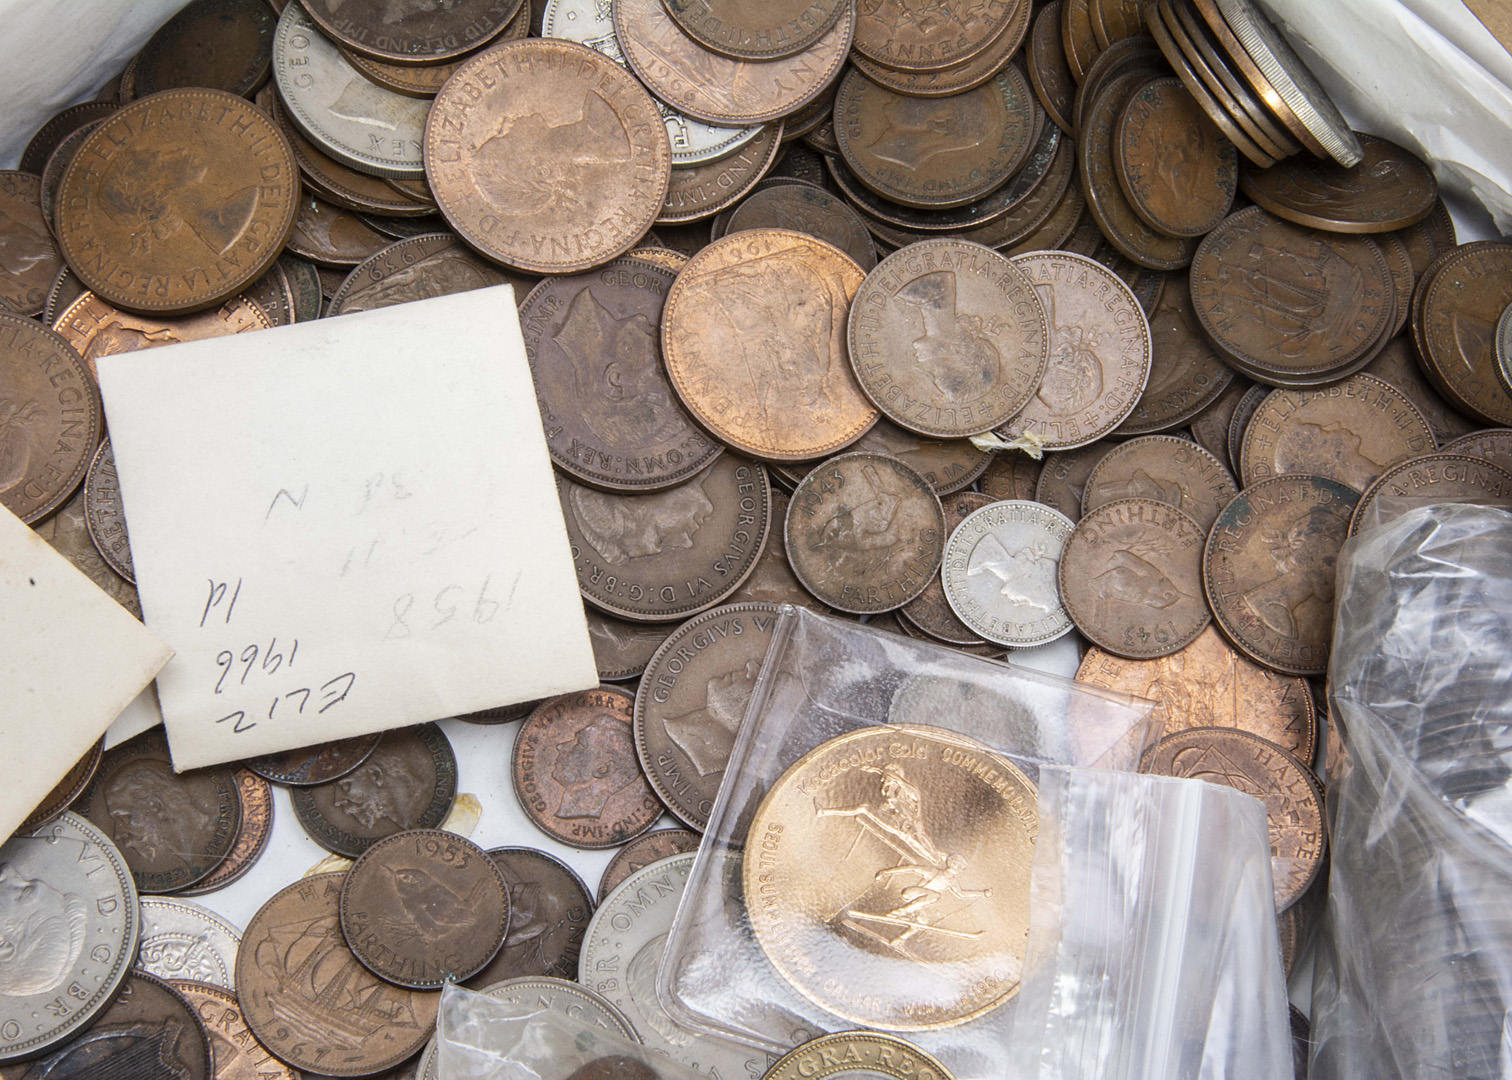 A box of British 20th century coins, also some earlier examples, mostly copper pennies and half